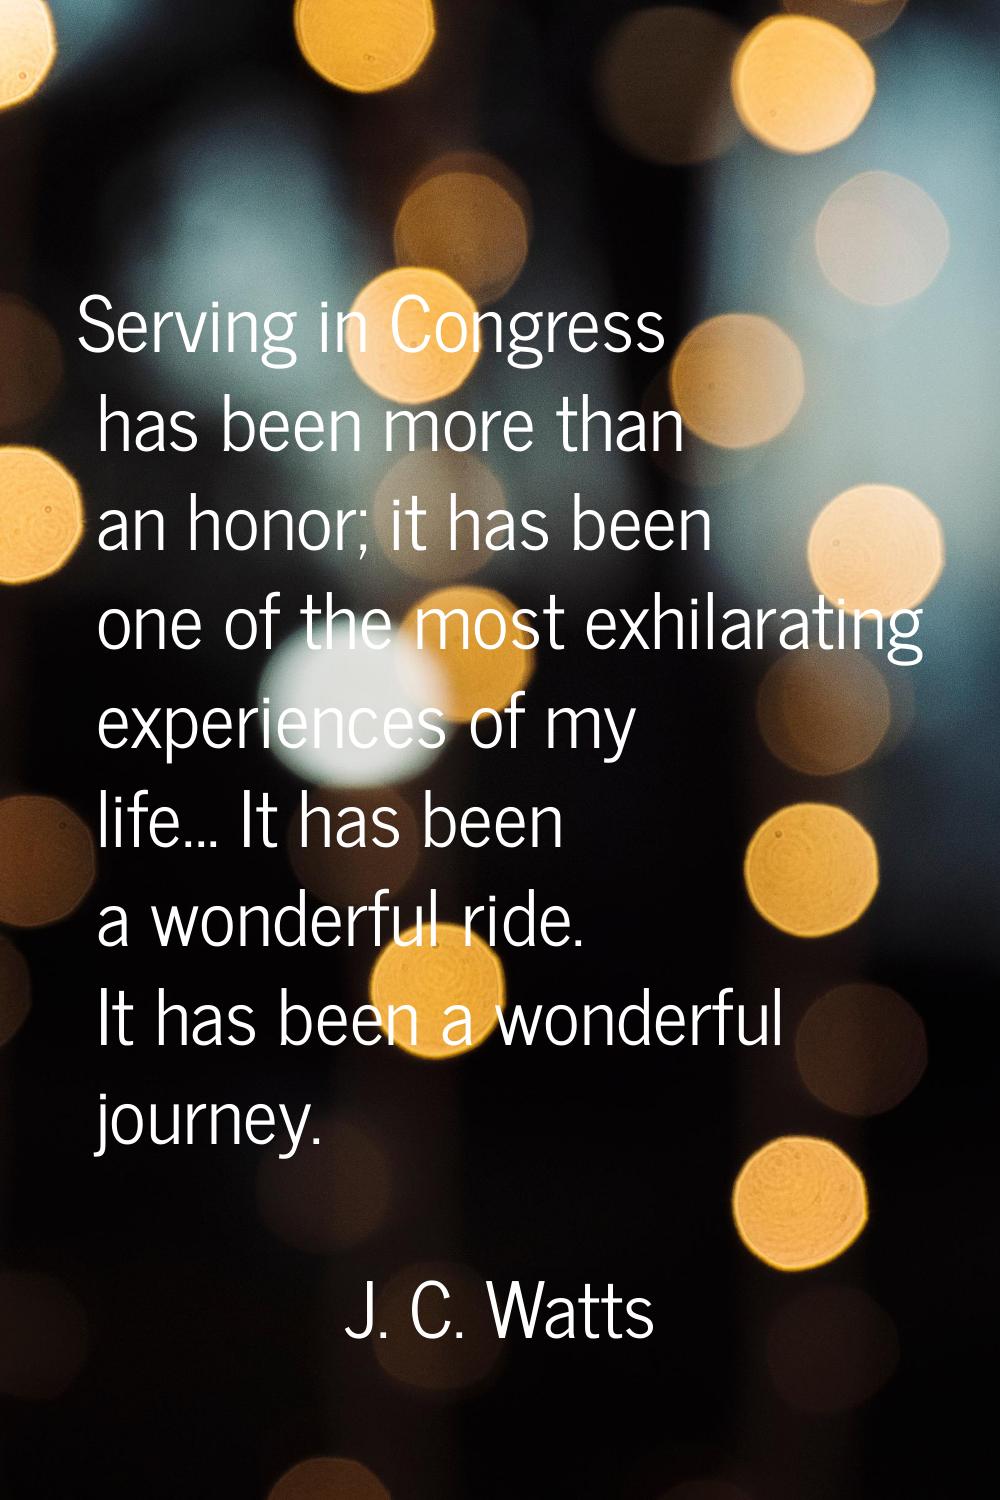 Serving in Congress has been more than an honor; it has been one of the most exhilarating experienc